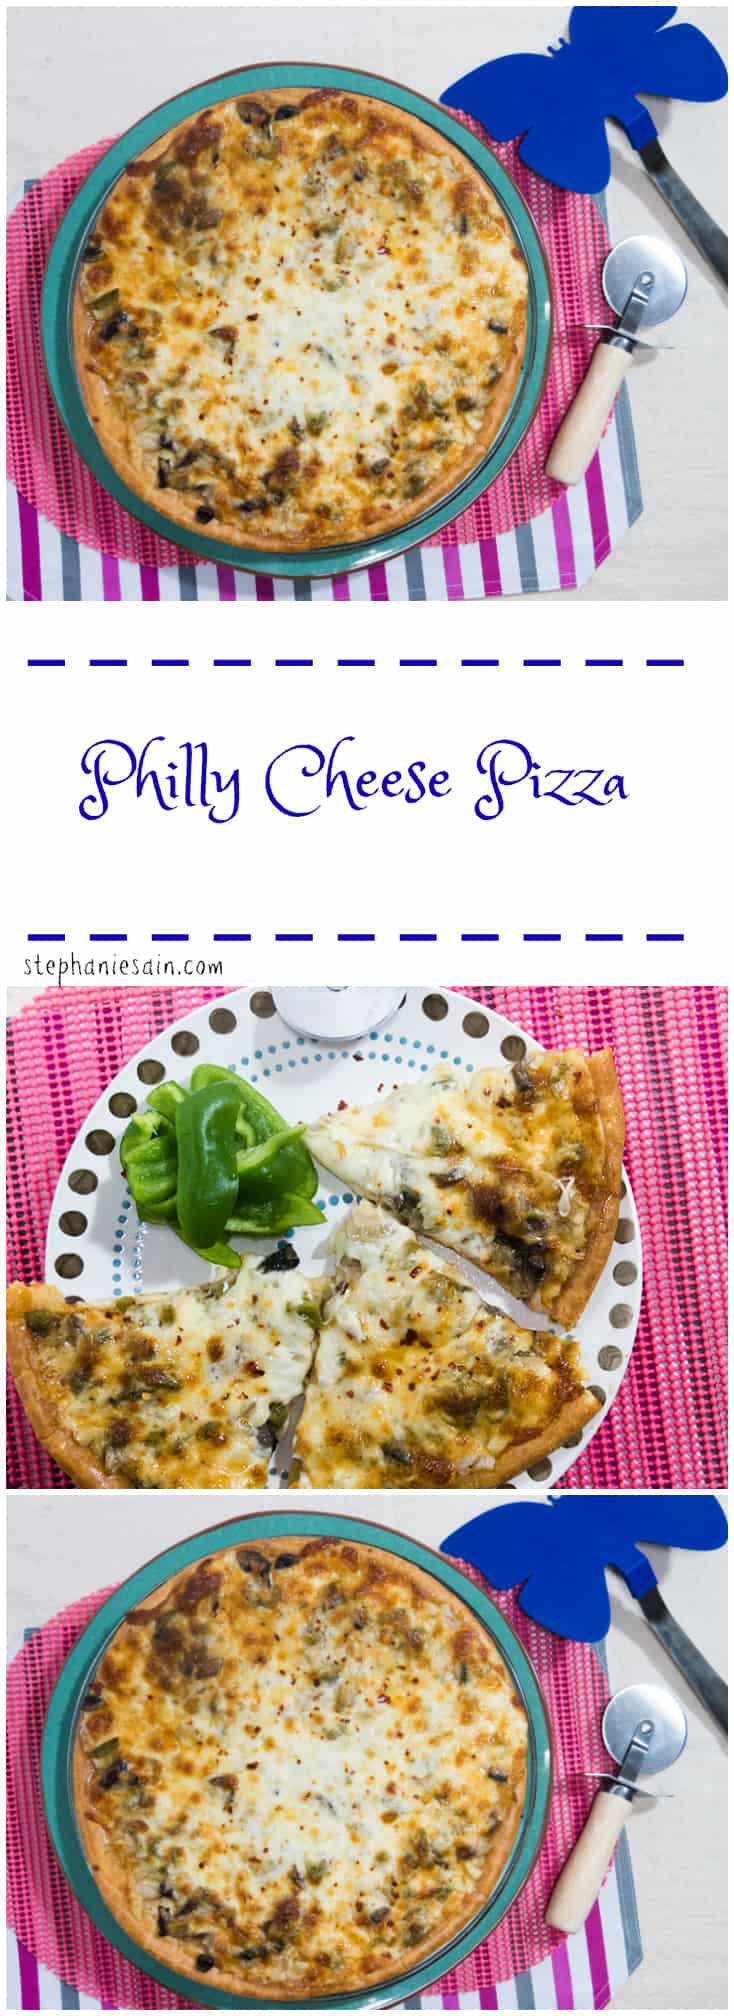 Philly Cheese Pizza is a tasty, easy to prepare pizza inspired by the flavors of a Philly sub. Vegetarian and Gluten Free.